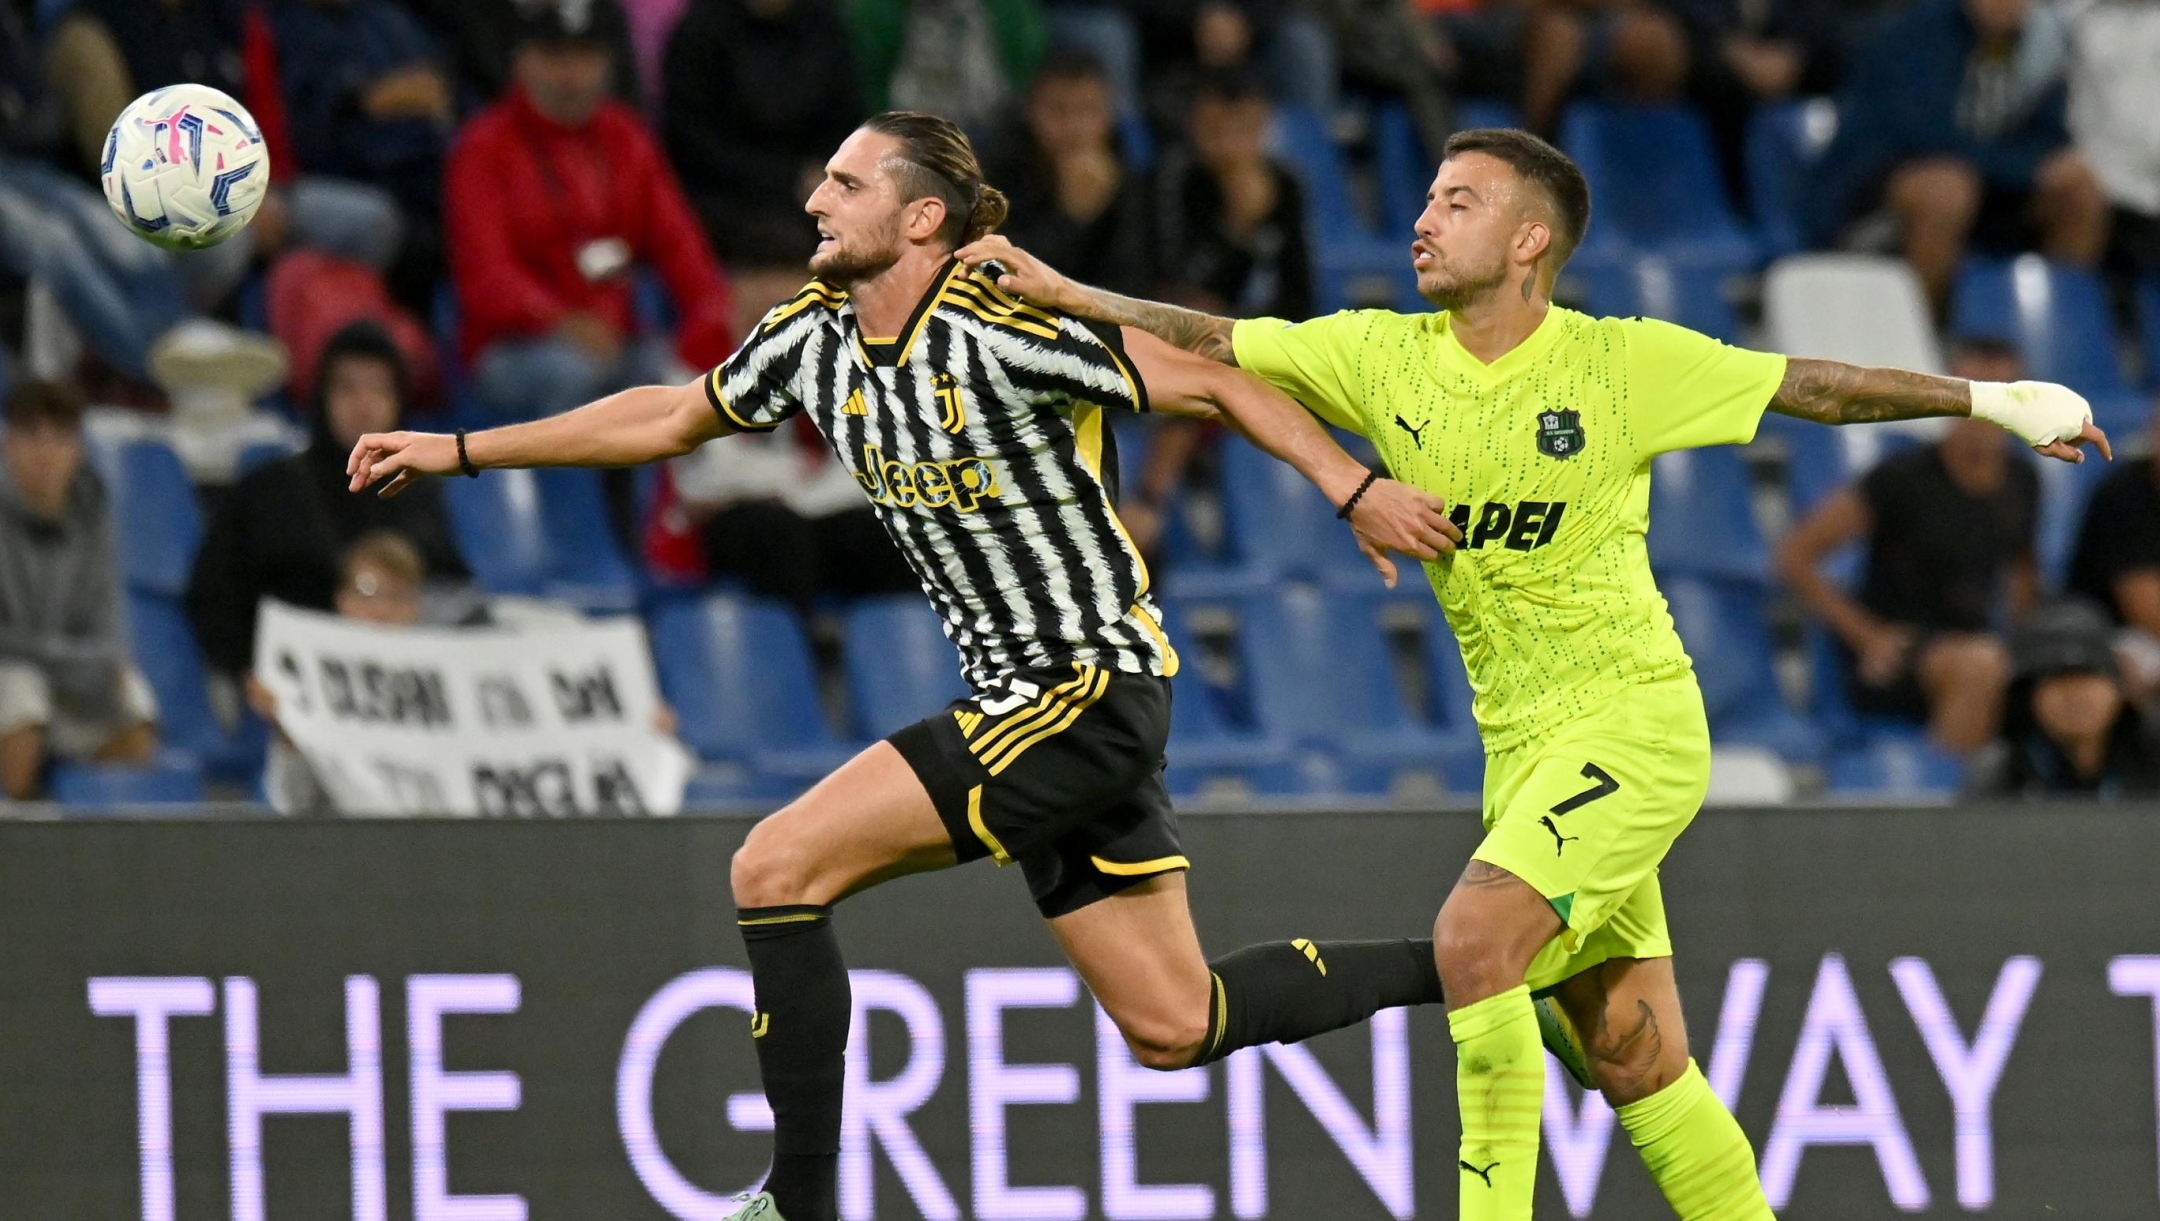 REGGIO NELL'EMILIA, ITALY - SEPTEMBER 23: Adrien Rabiot of Juventus is challenged by Matheus Henrique of Sassuolo during the Serie A TIM match between US Sassuolo and Juventus at Mapei Stadium - Citta' del Tricolore on September 23, 2023 in Reggio nell'Emilia, Italy. (Photo by Alessandro Sabattini/Getty Images)